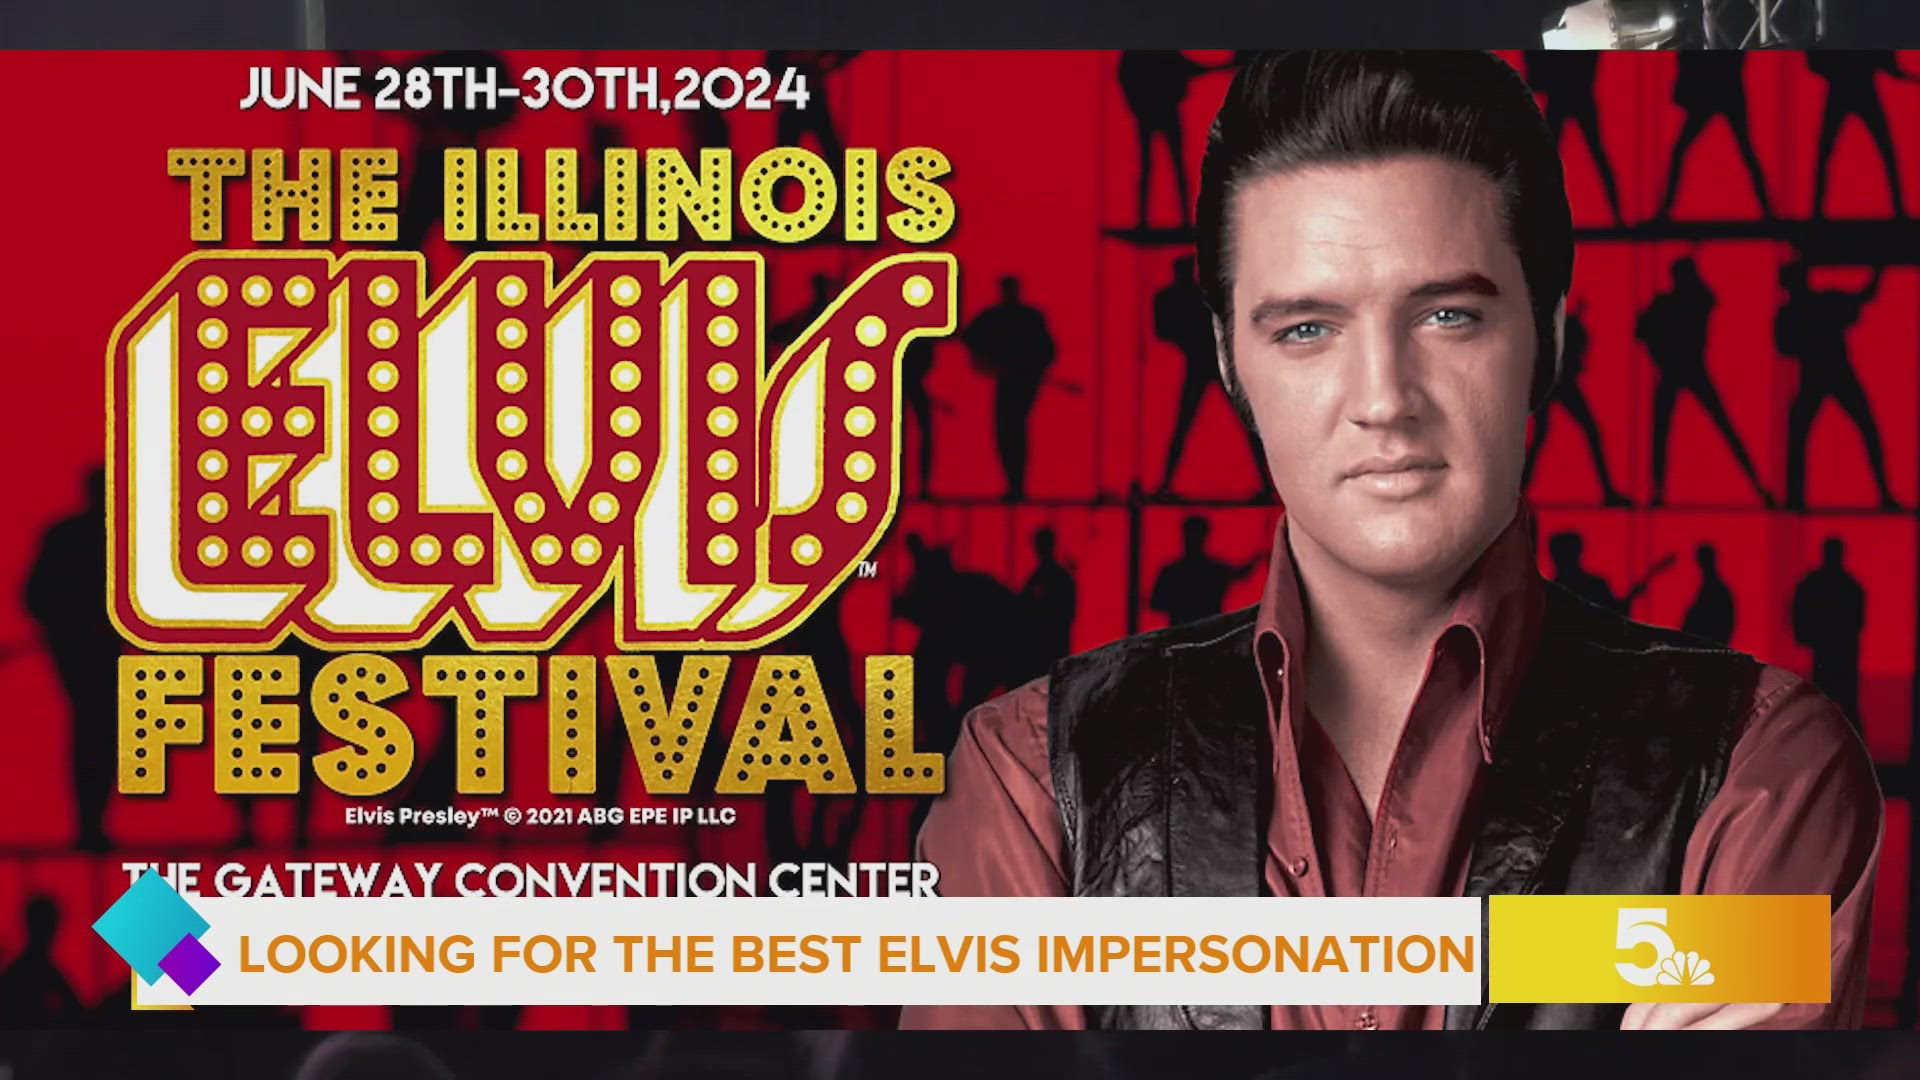 This Friday thru Sunday you can expect jam packed days filled with nothing but Elvis joy.